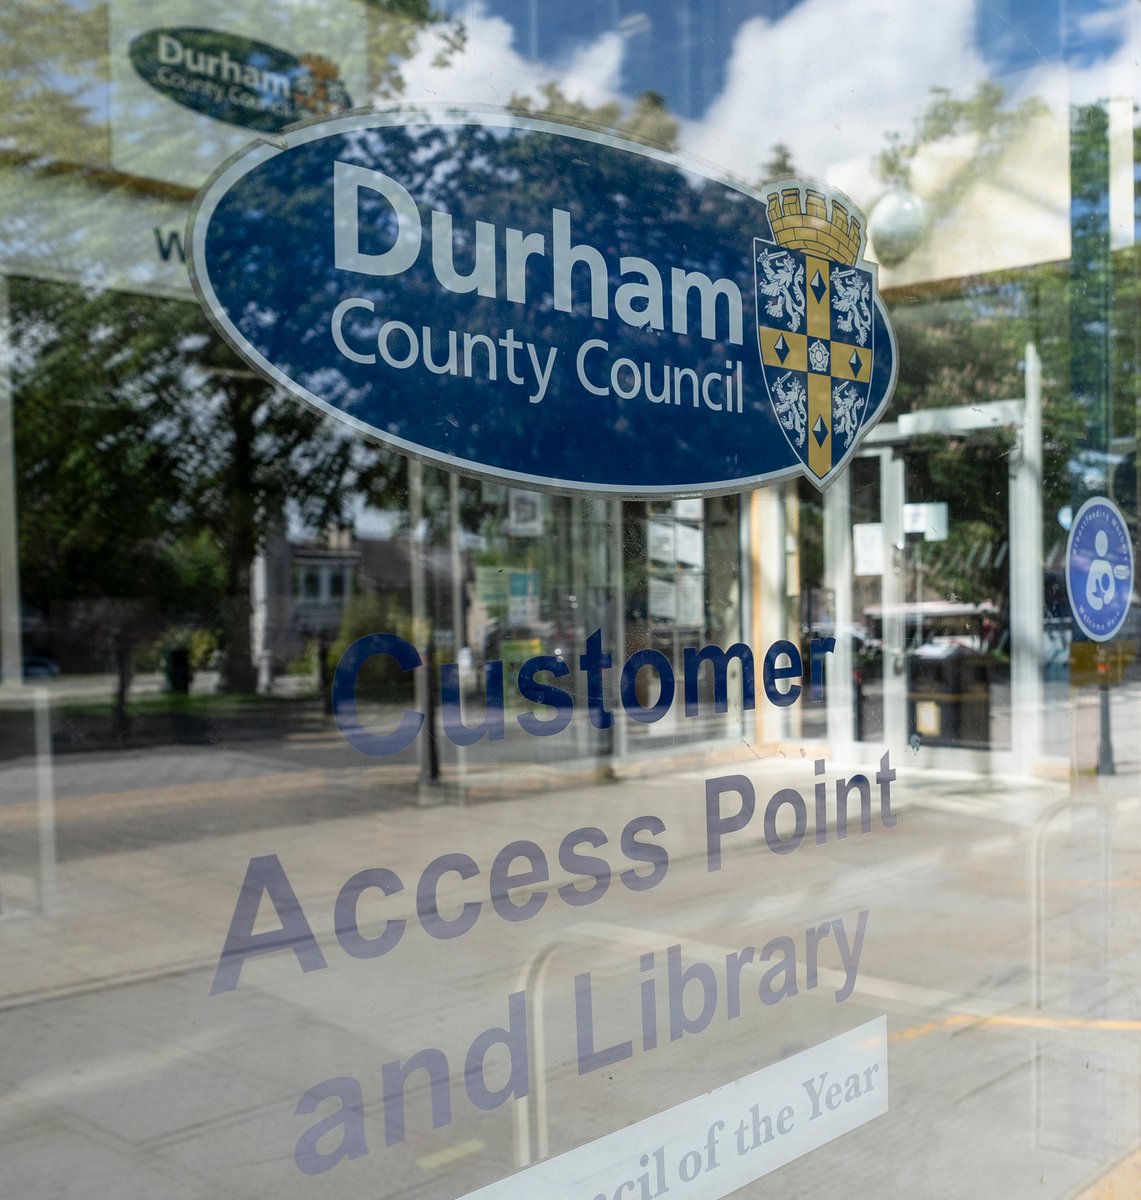 We’re proposing to reduce opening hours at our existing Customer Access Points to allow us to provide face-to-face customer services at more locations, reducing the distance some residents have to travel. Find out more and have your say: ow.ly/Rg4O50Rvule